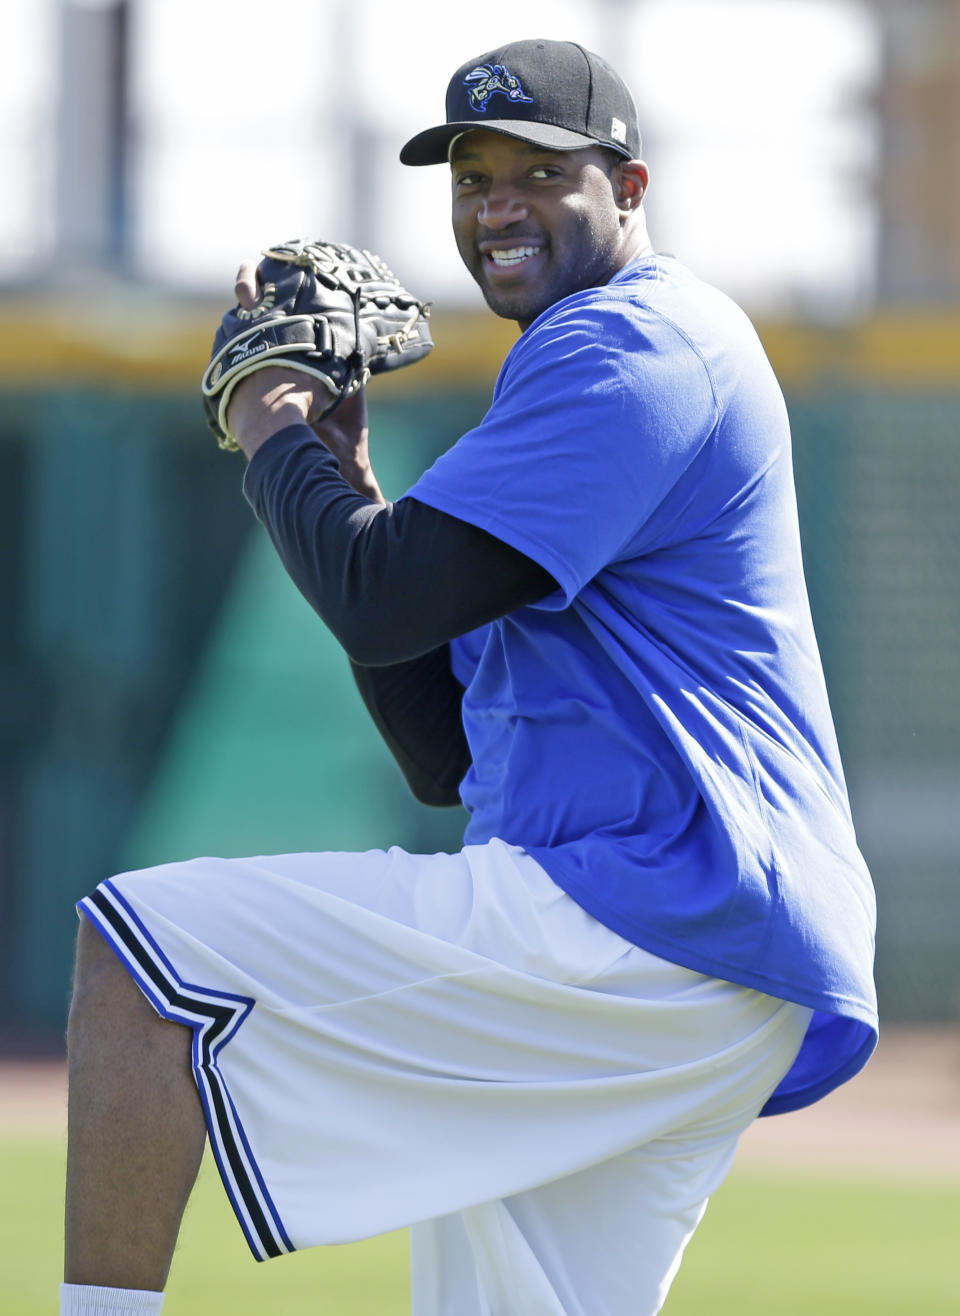 Retired NBA All-Star Tracy McGrady throws a pitch at the Sugar Land Skeeters baseball stadium Wednesday, Feb. 12, 2014, in Sugar Land, Texas. McGrady hopes to try out as a pitcher for the independent Atlantic League Skeeters. (AP Photo/Pat Sullivan)